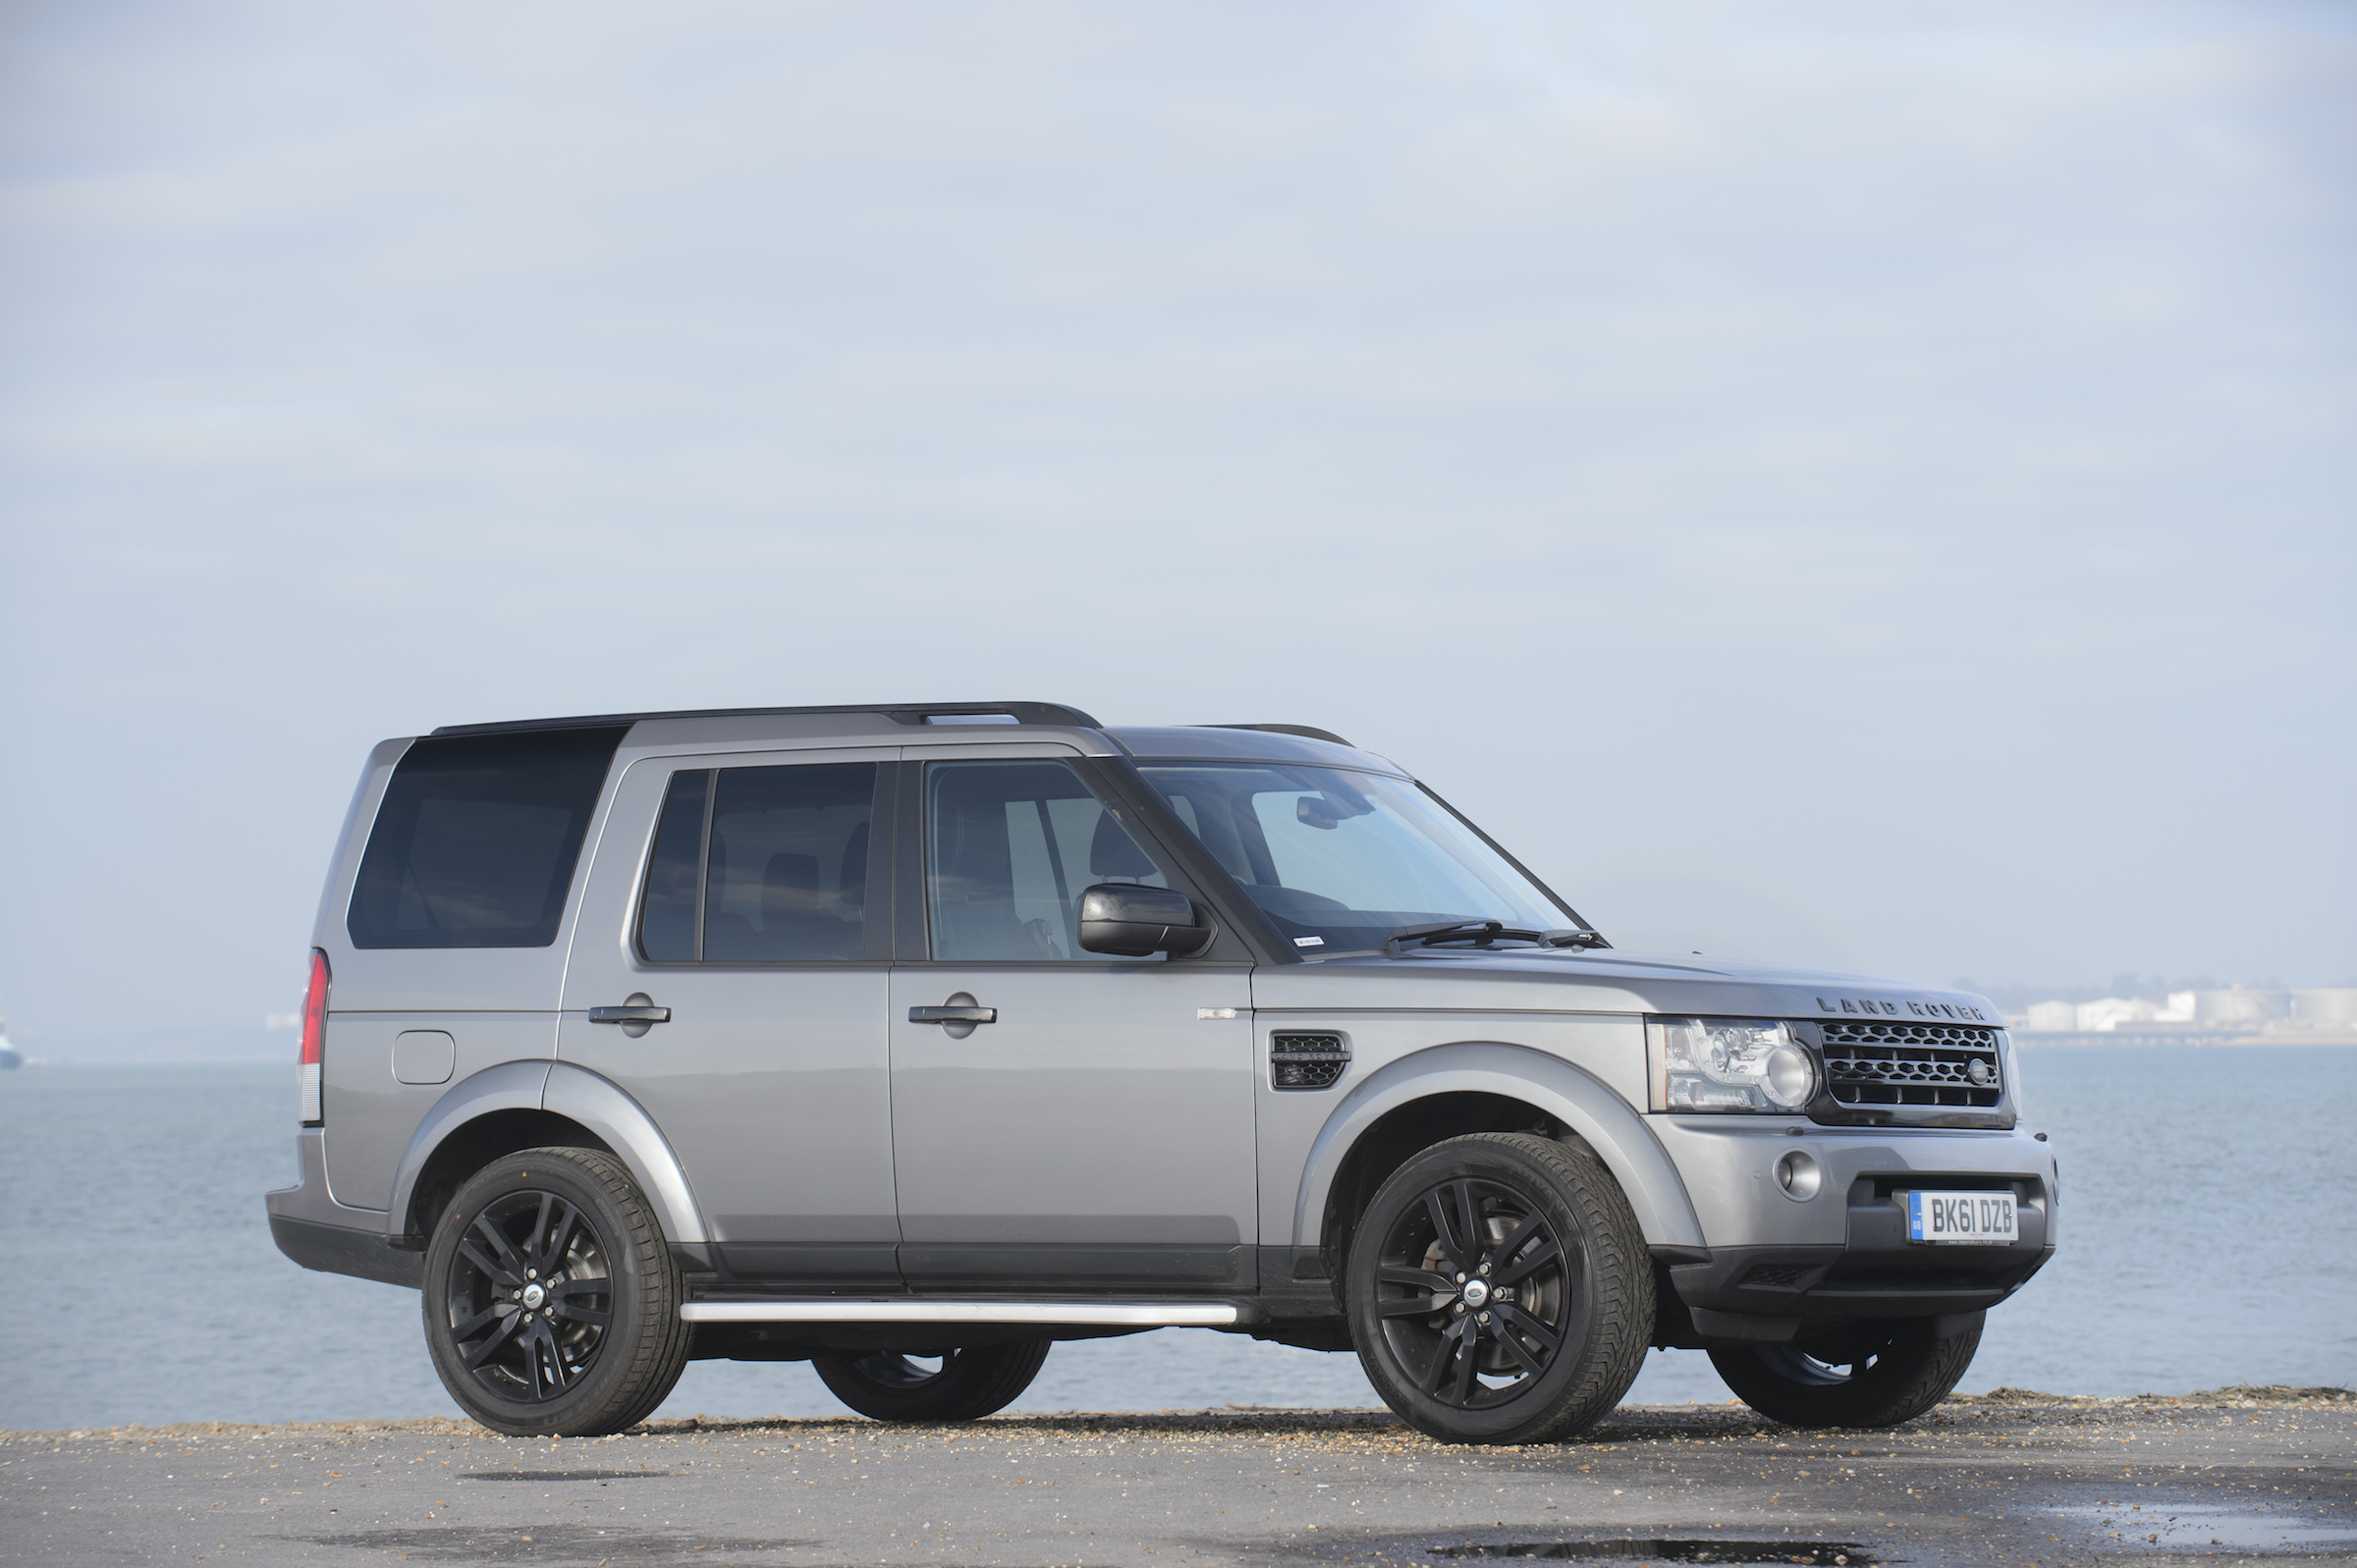 Land Rover Discovery 3 User Manual Download transferrenew